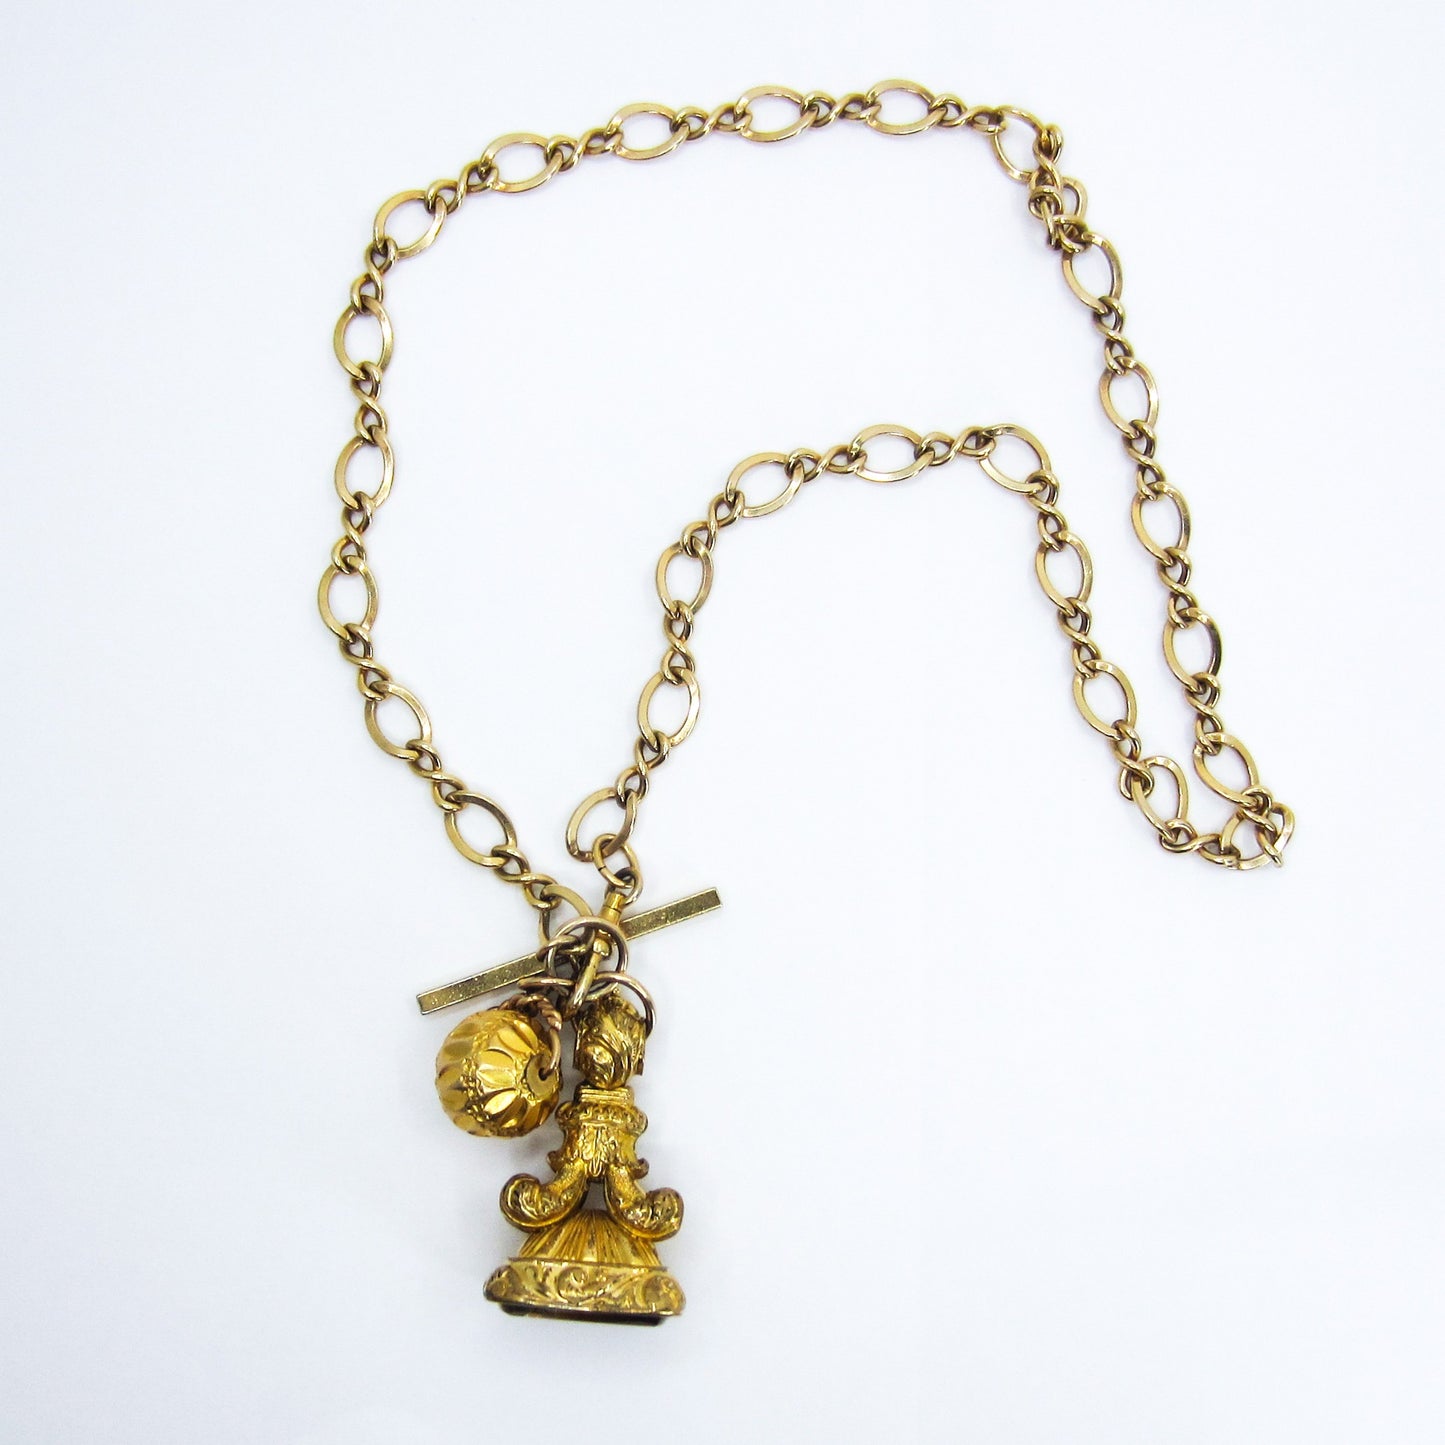 Victorian Citrine Fob Charm Necklace Gold-filled c. 1890